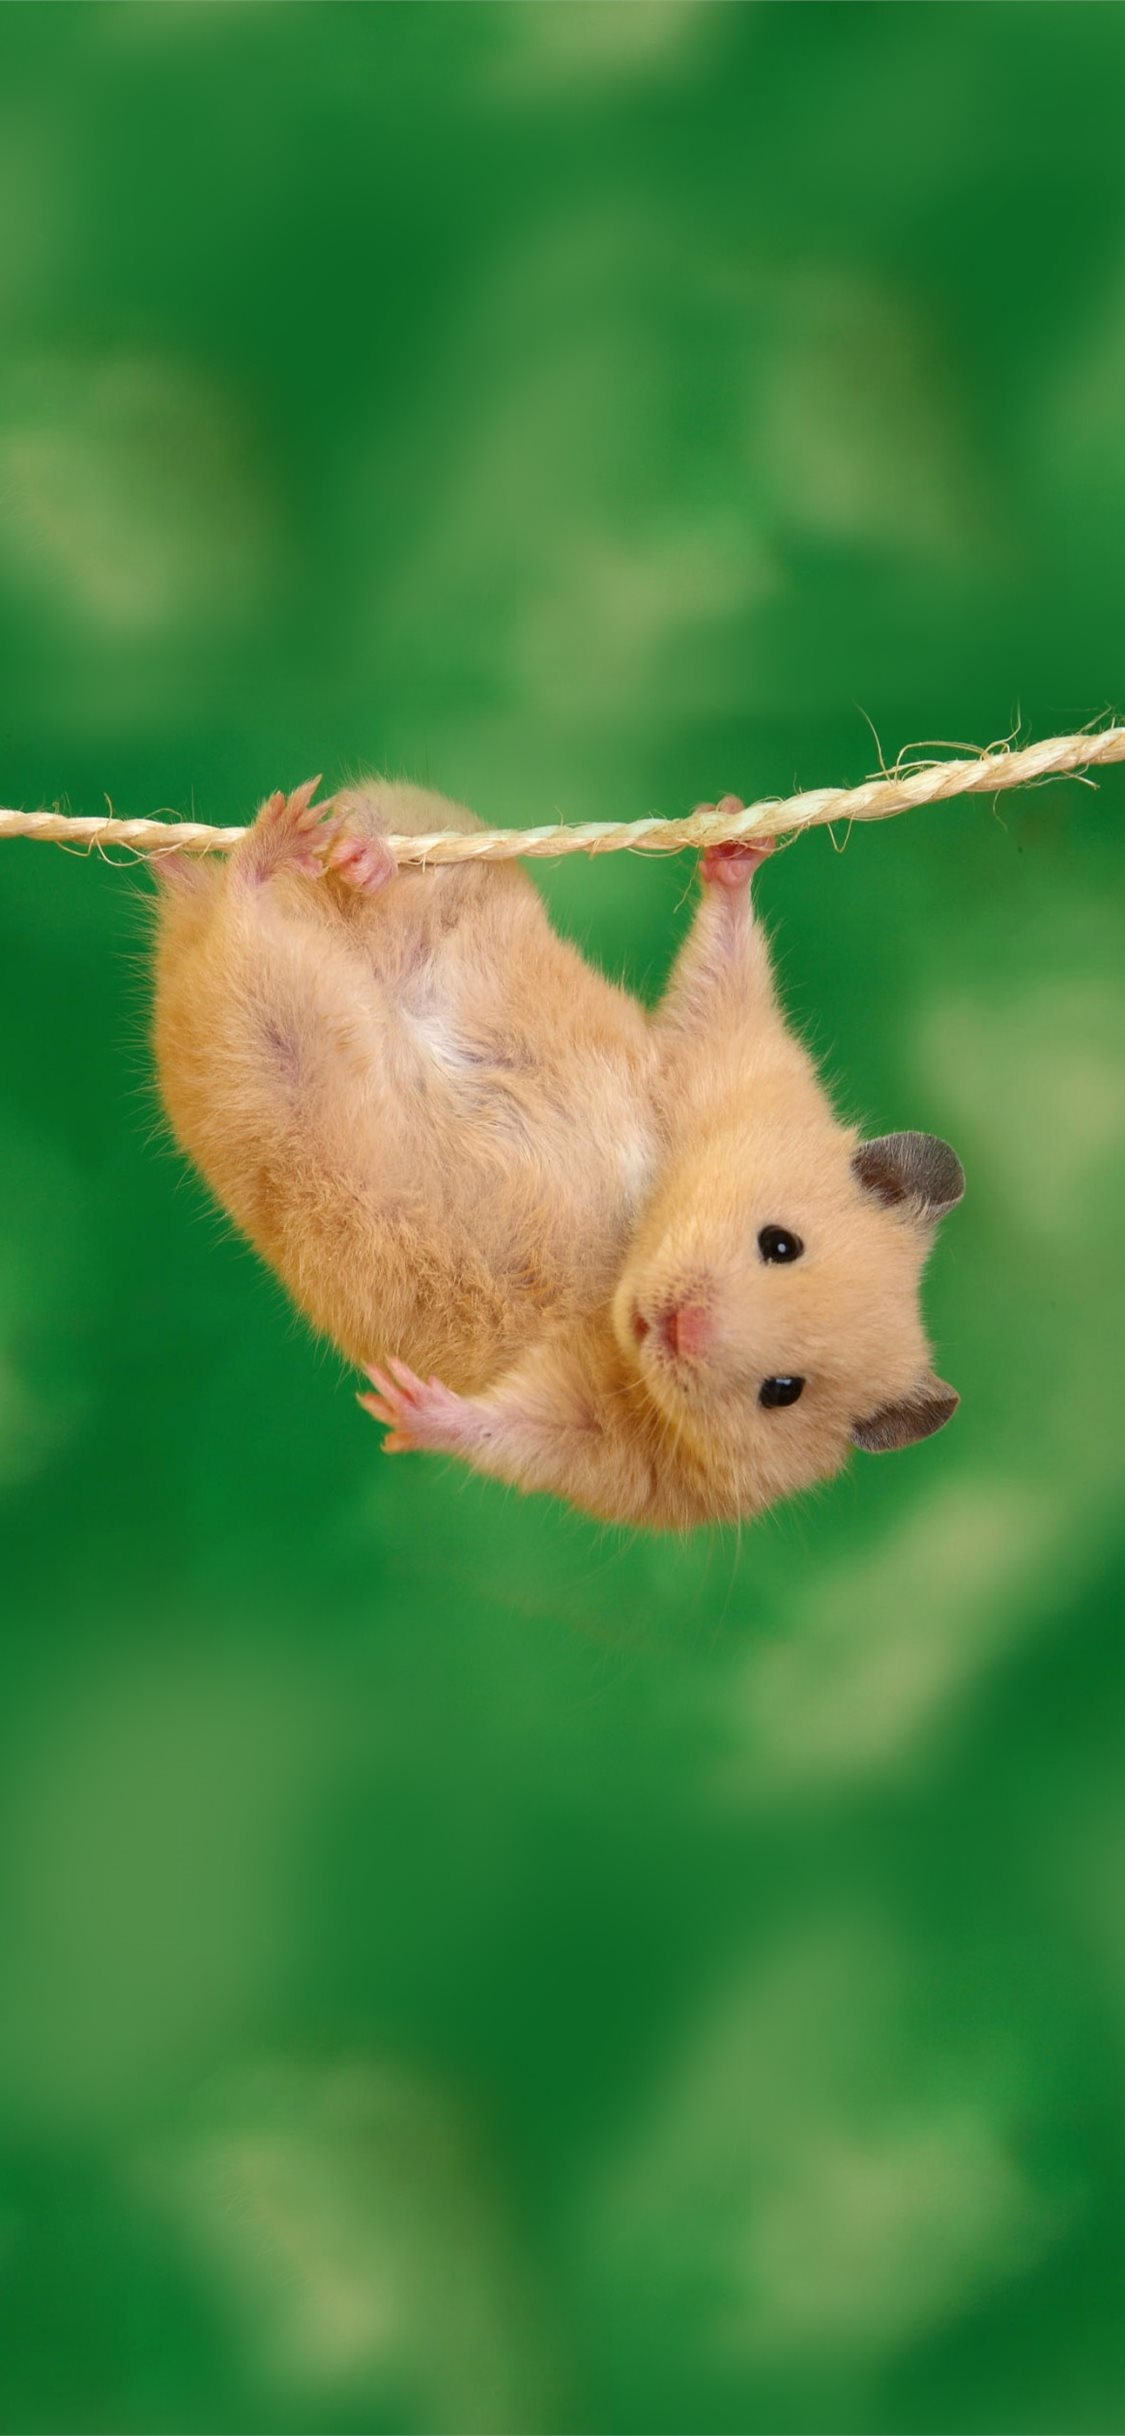 Hamster wallpapers for iPhone, Cute and fluffy, Adorable little pets, Whiskered cuties, 1130x2440 HD Phone